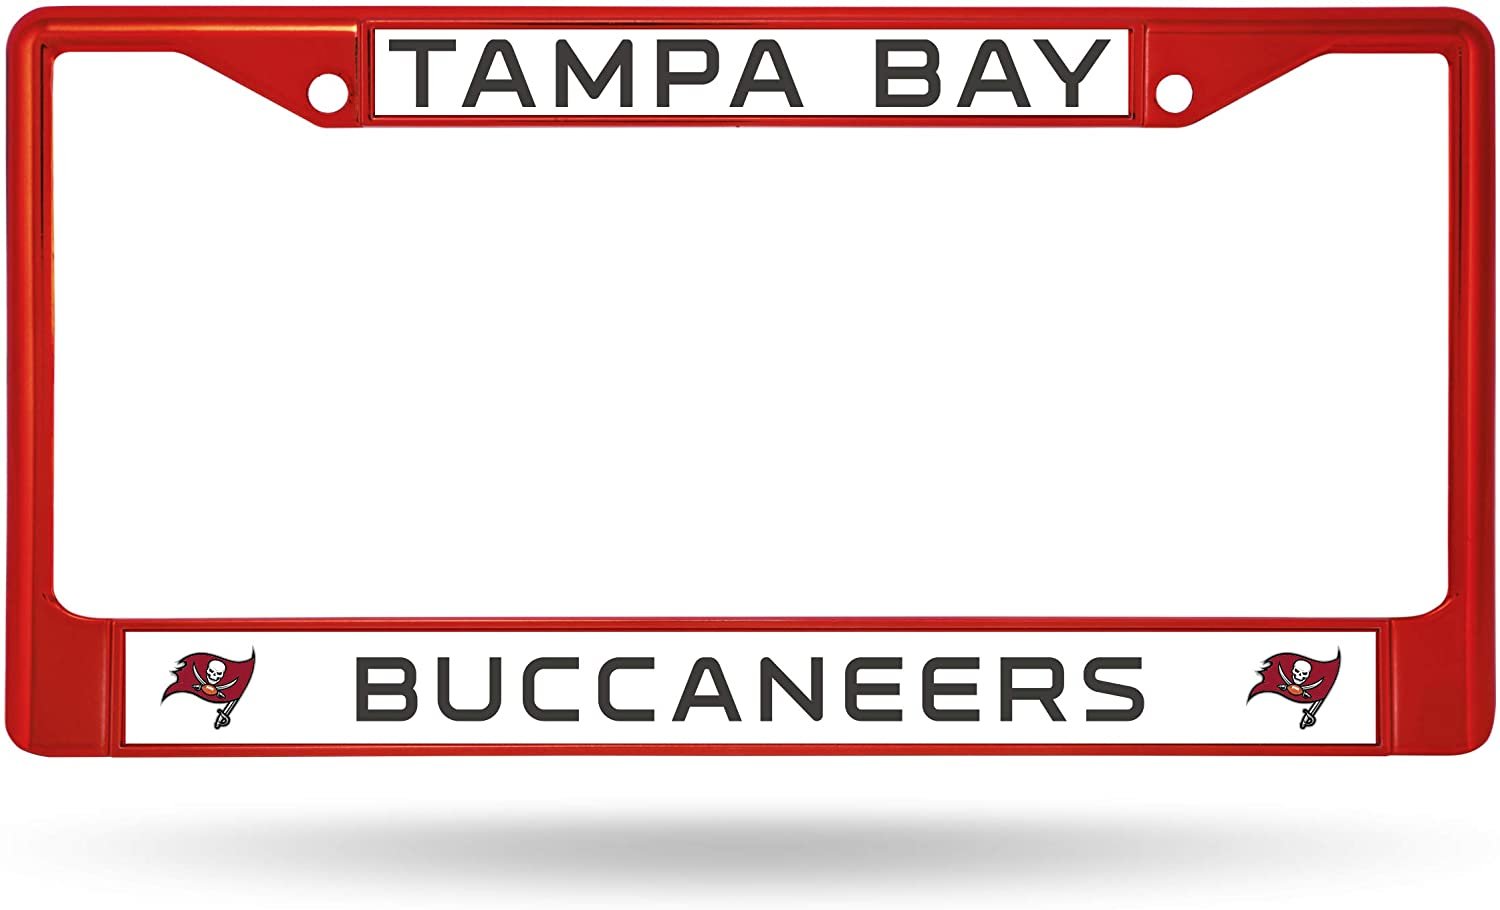 Tampa Bay Buccaneers Premium Red Metal License Plate Frame Tag Cover, 6x12 Inch